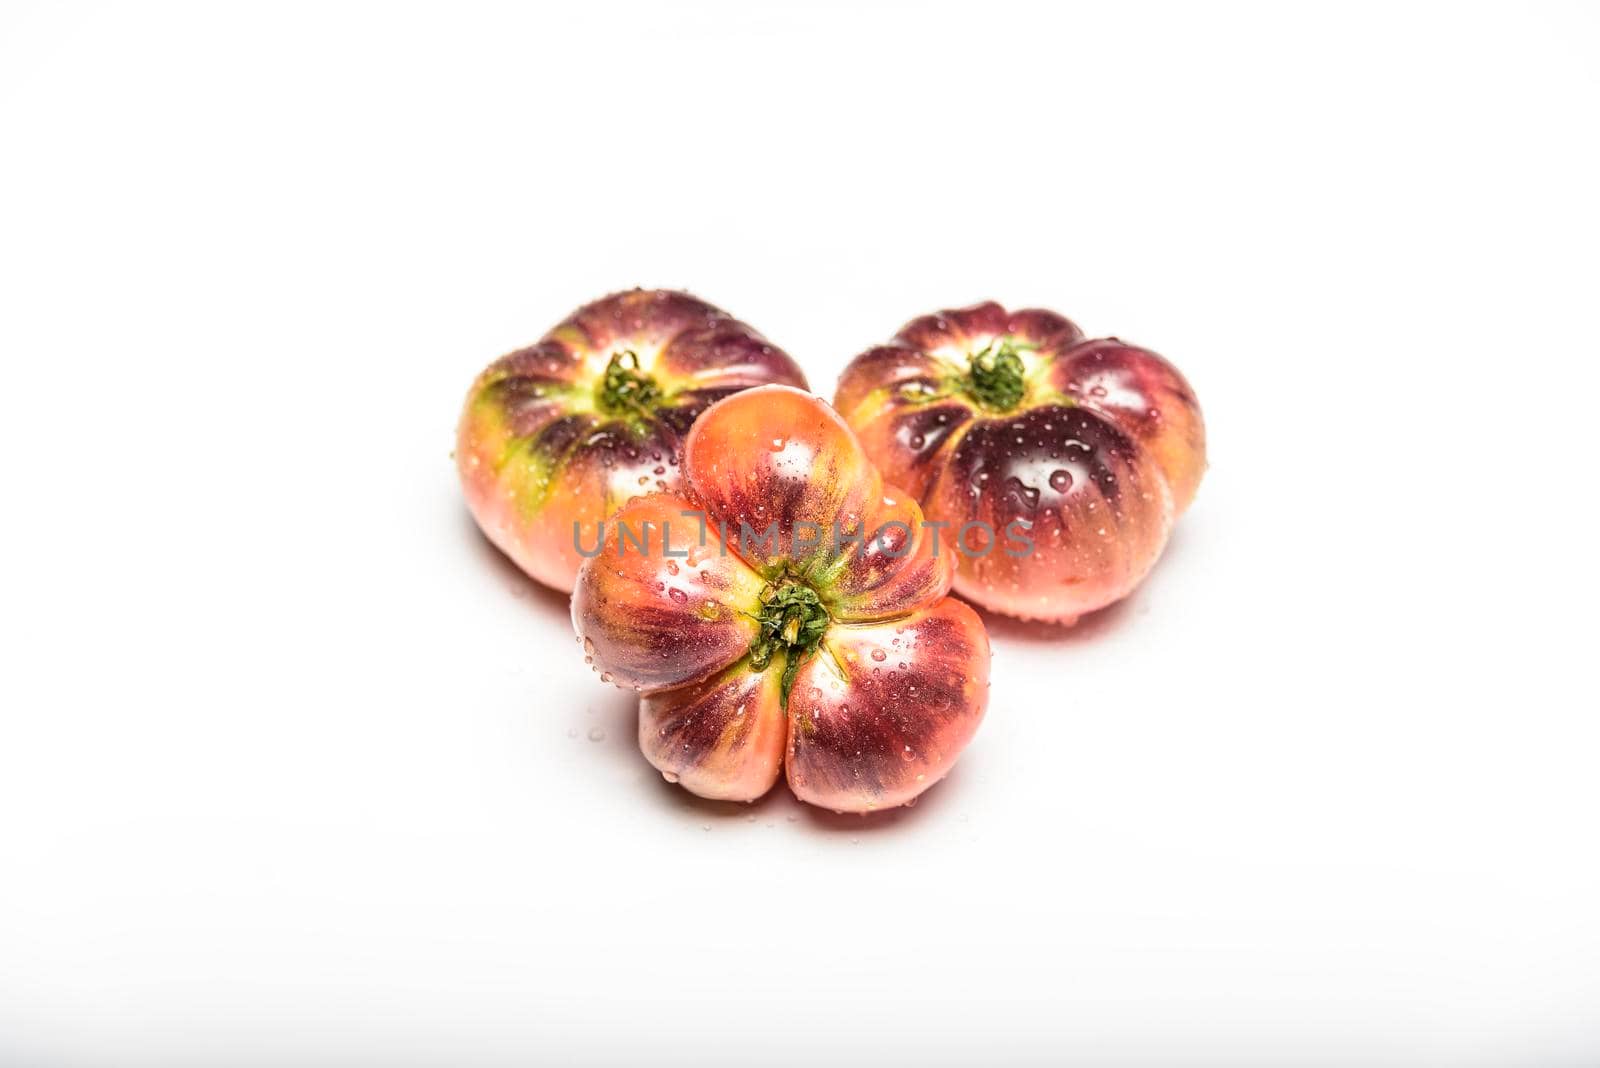 Several tomatoes of the tiger variety on a white background